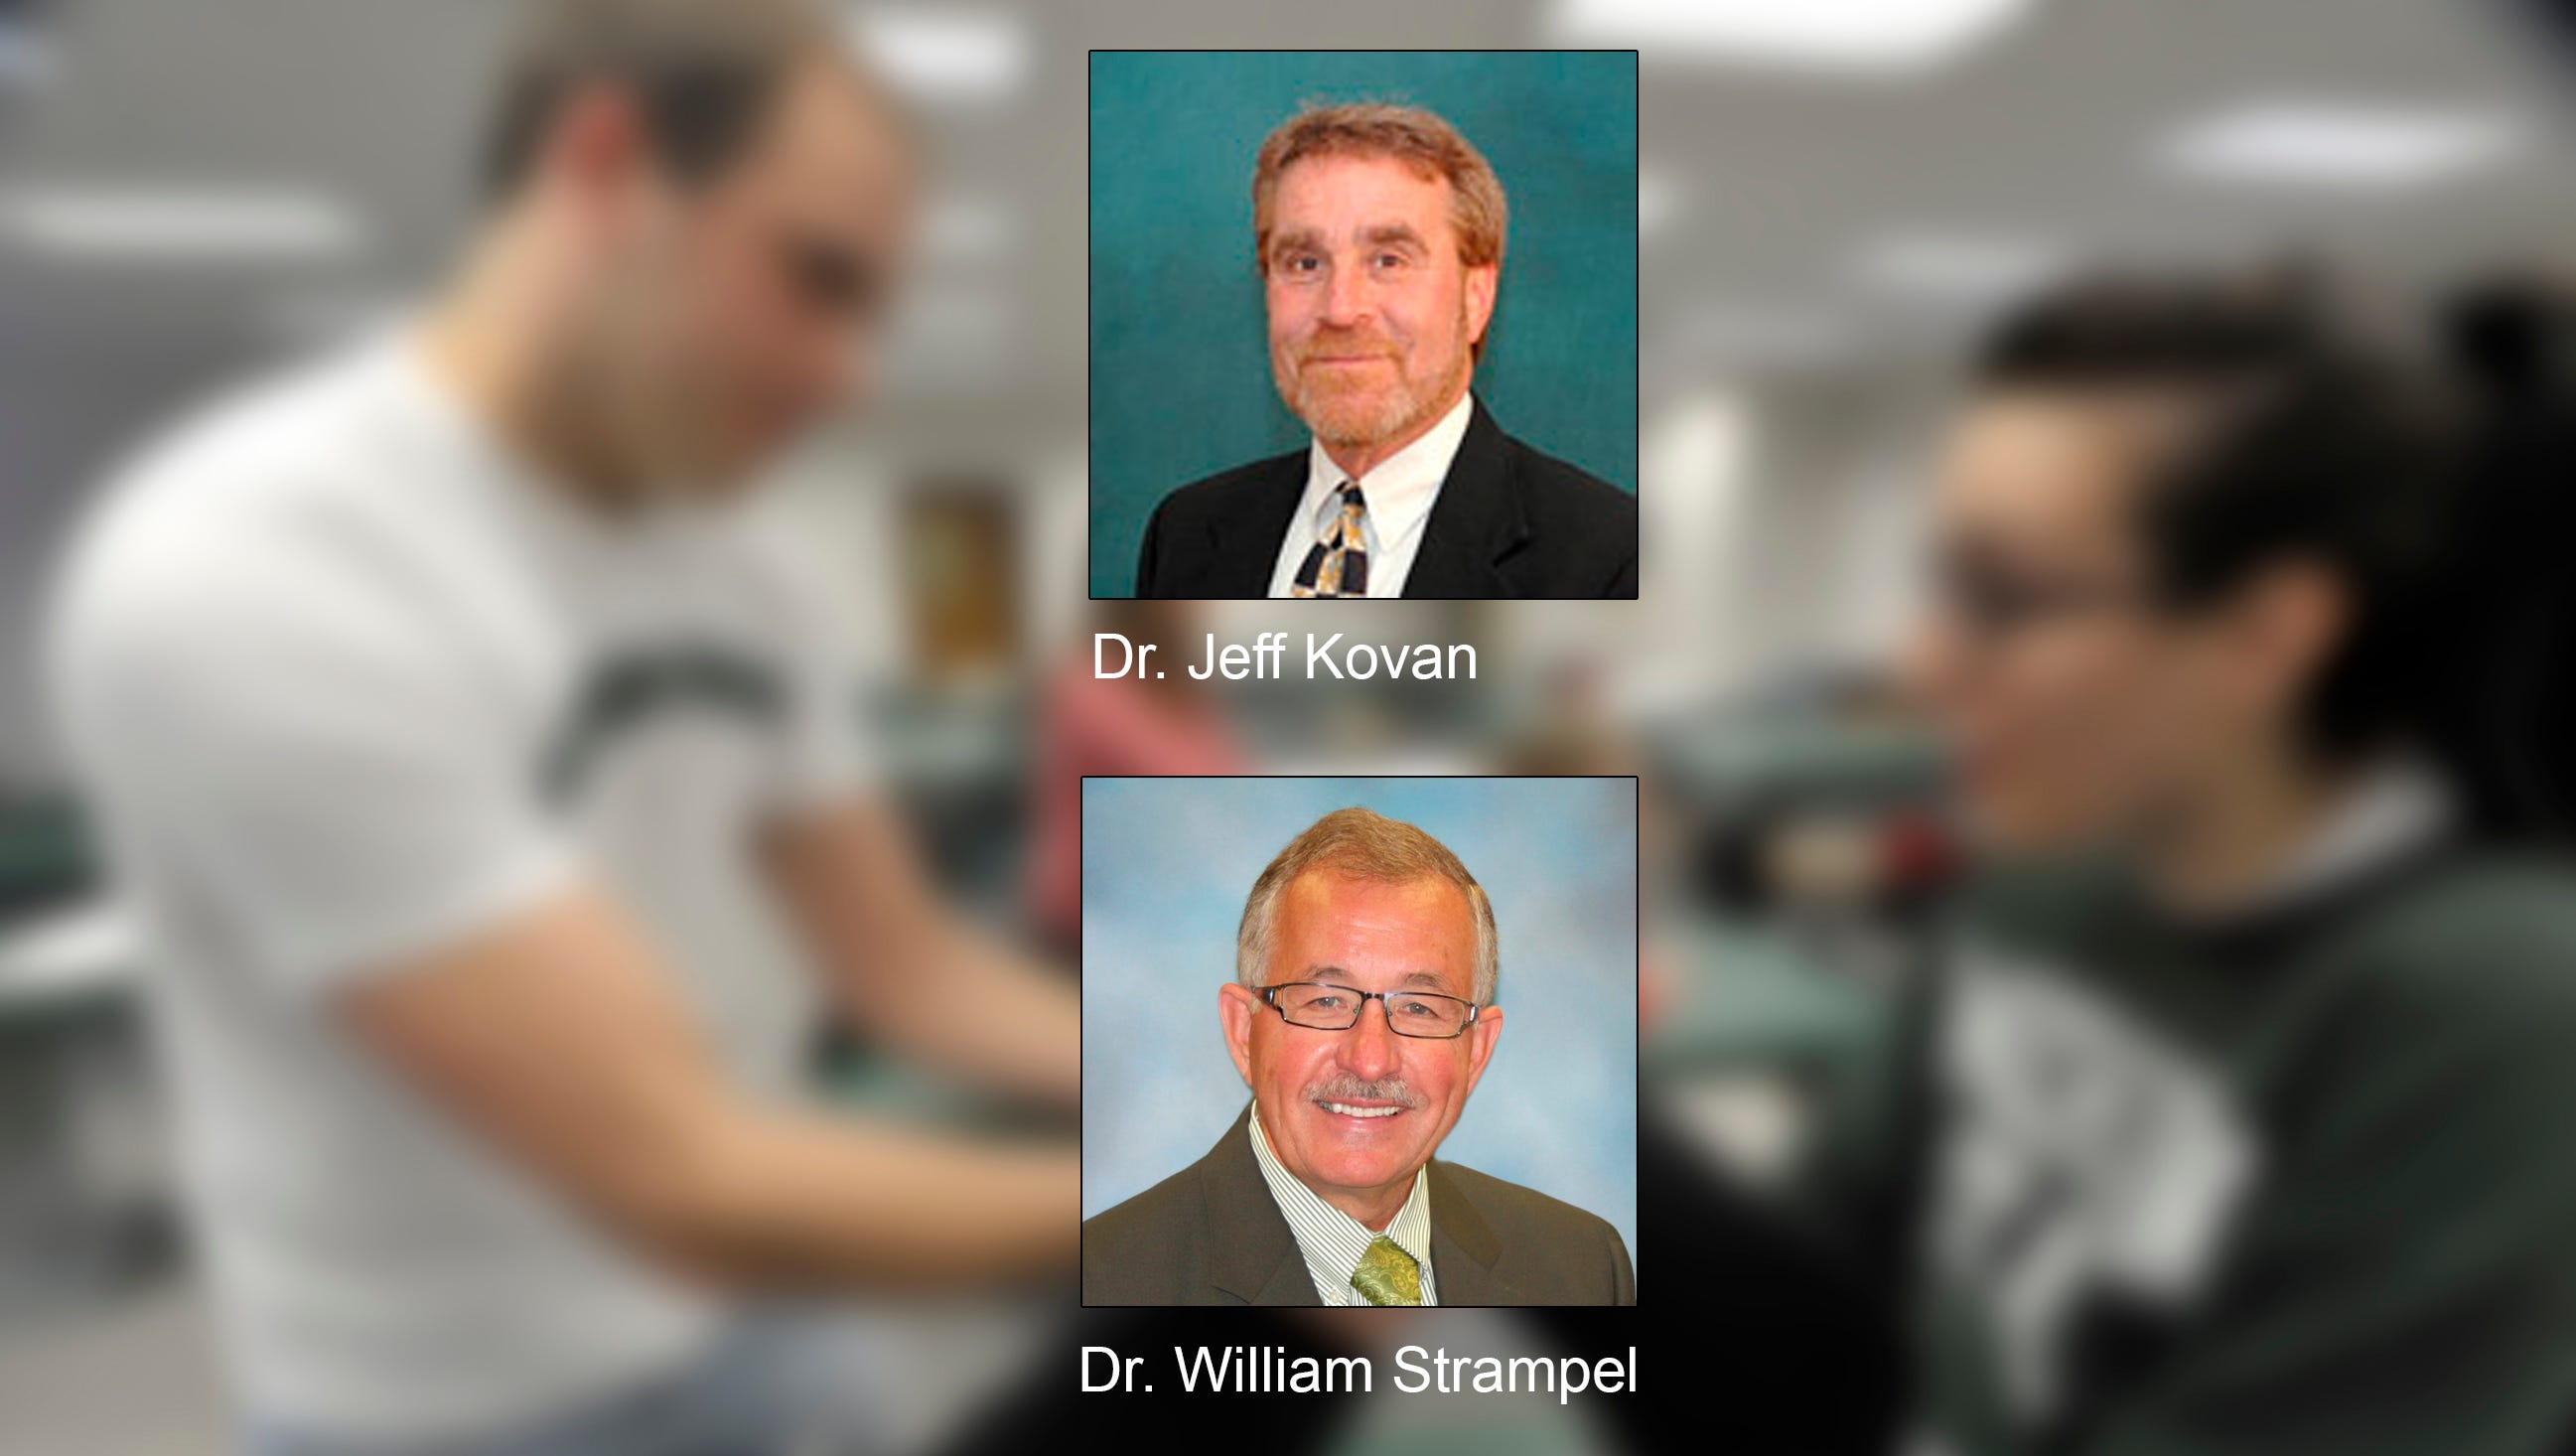 Dr. Kovan tells an MSU investigator for sexual misconduct complaints under Title IX laws, who notifies Nassar’s boss, Dr. William Strampel.  Strampel tells Nassar to limit skin-to-skin contact and have a chaperone during treatments, MSU emails show.